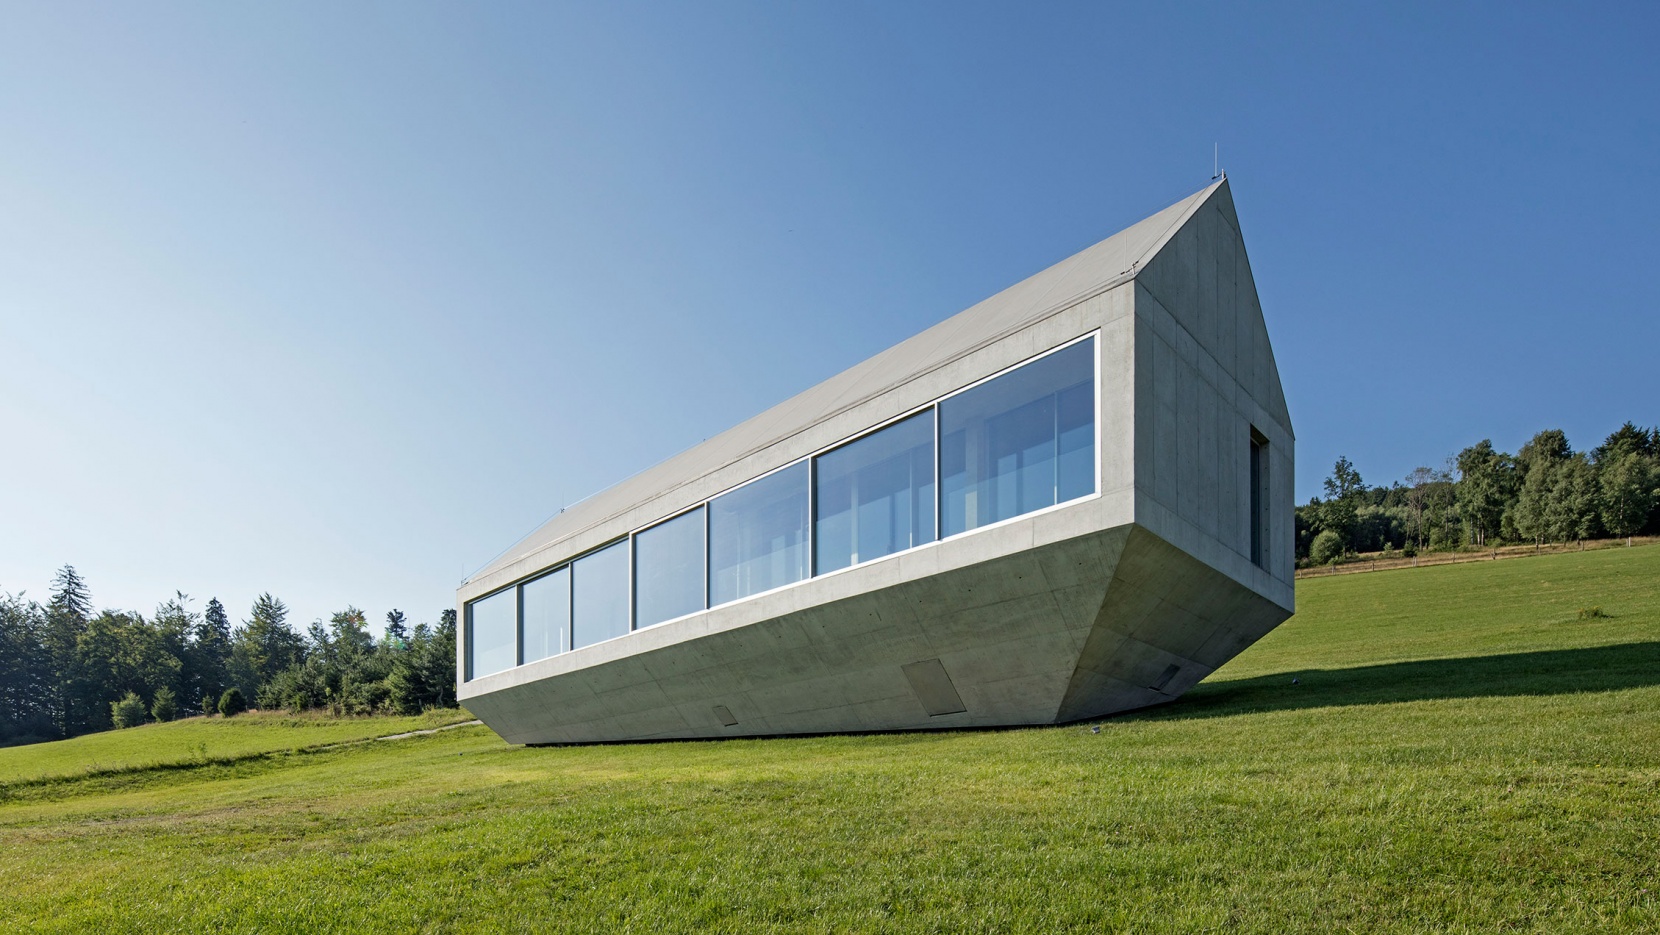 A Thoroughly Modern Ark By Robert Konieczny Kwk Promes In Poland